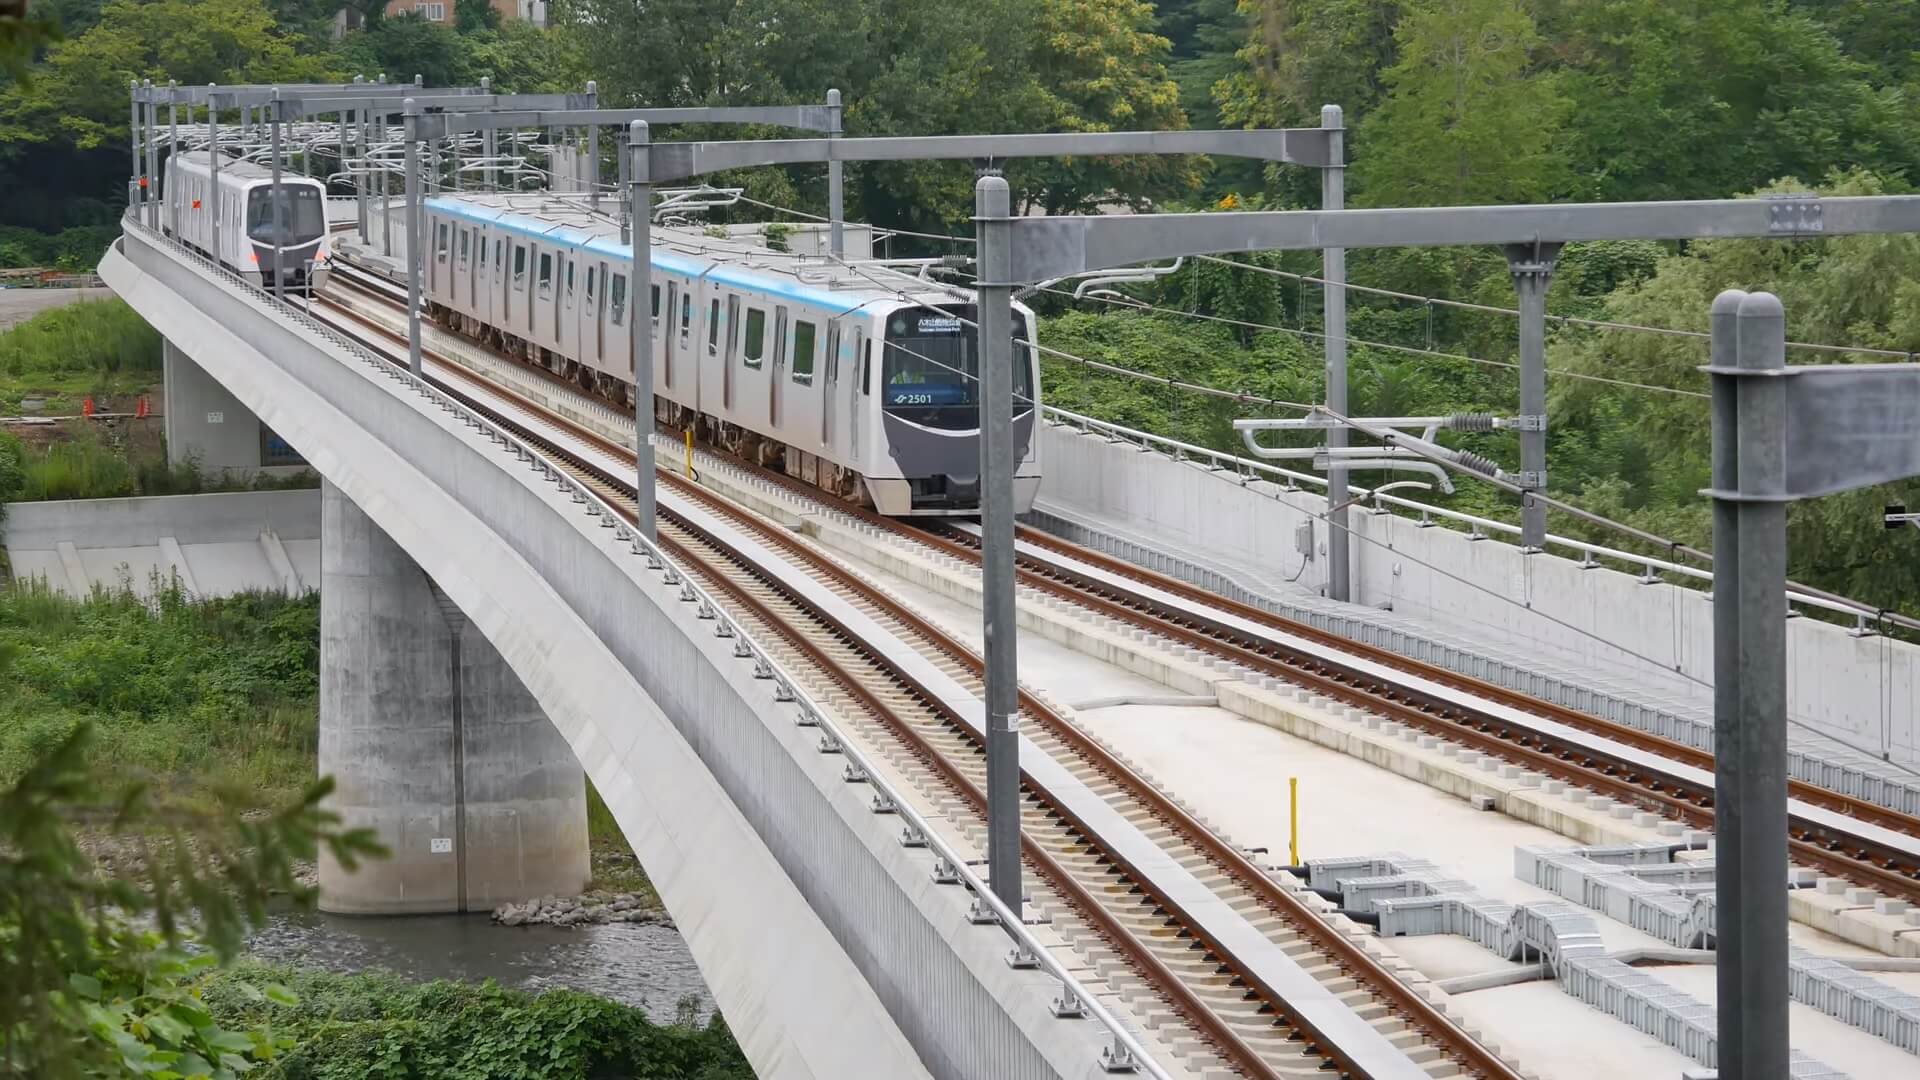 REALITY CHECK: The dishonesty of "No one builds with SkyTrain anymore"